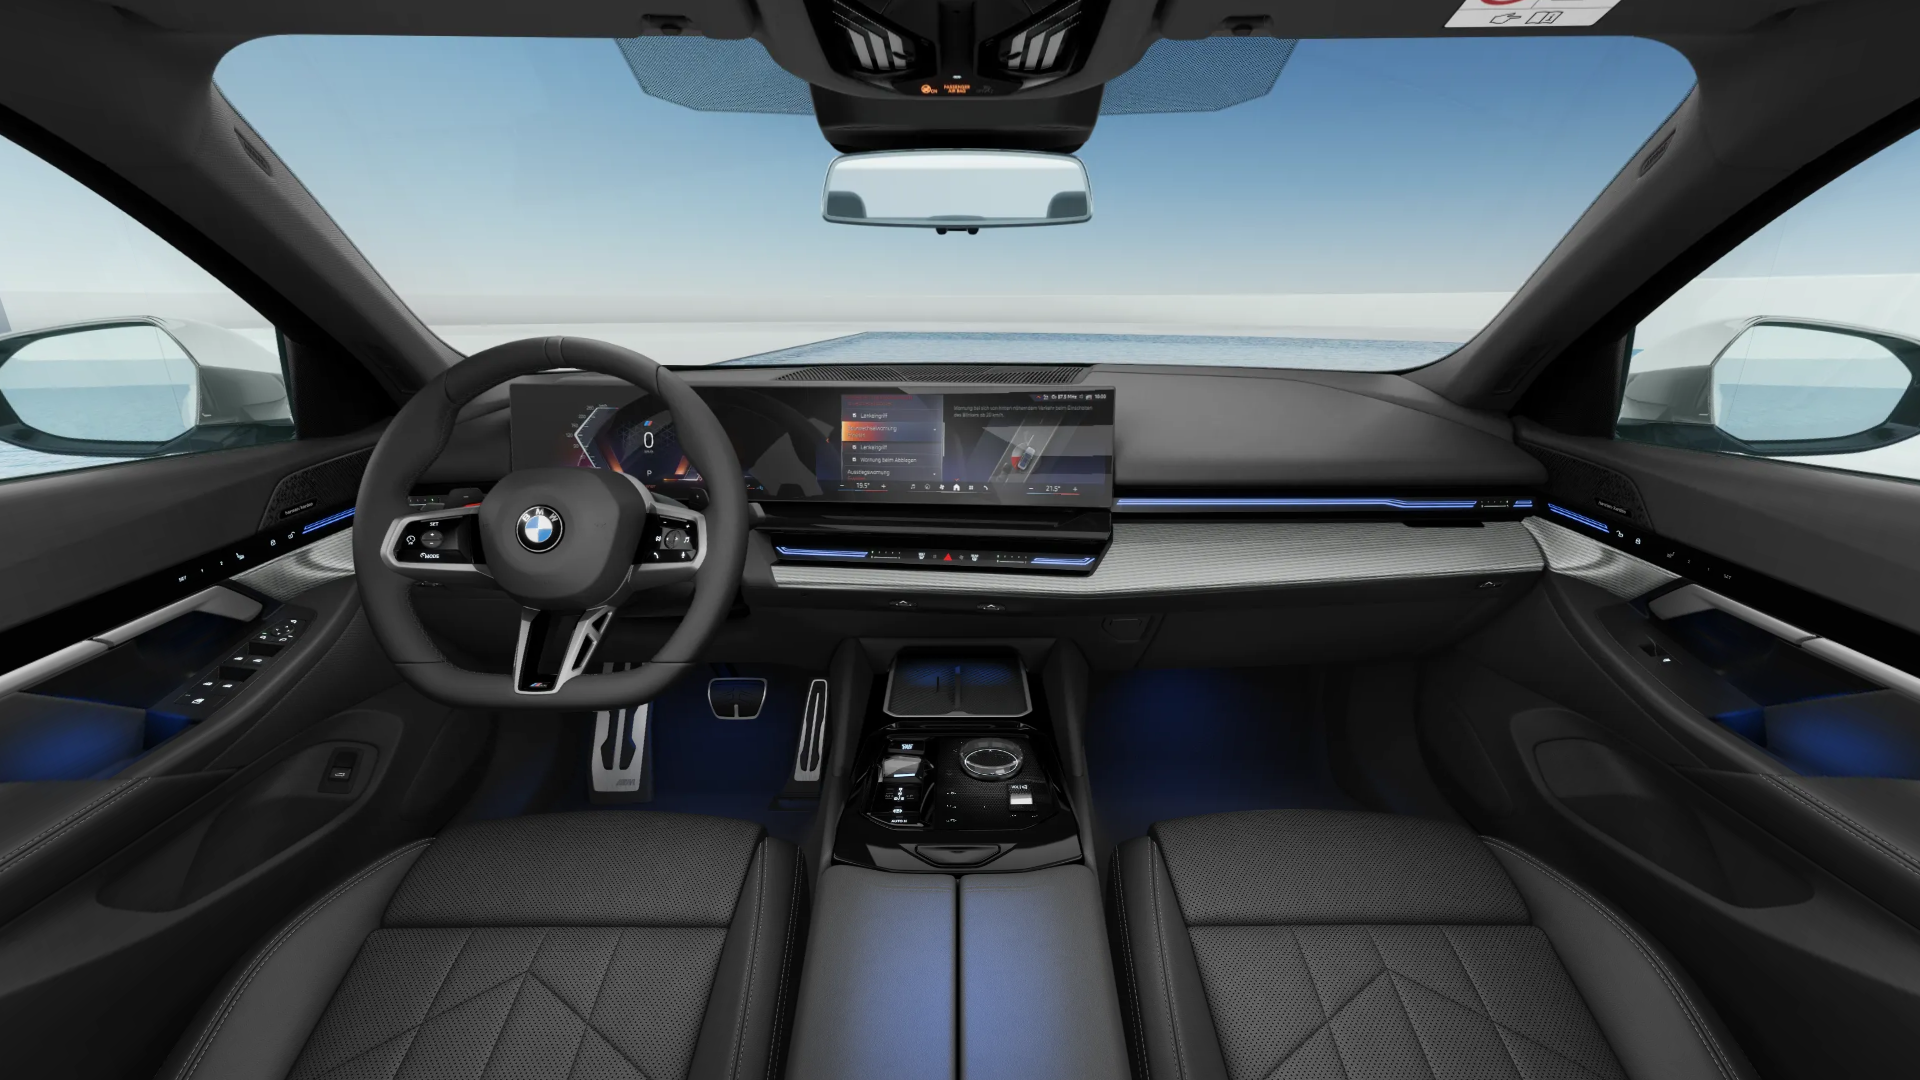 bmw 5 series, new entry-level bmw 5 series – south african pricing